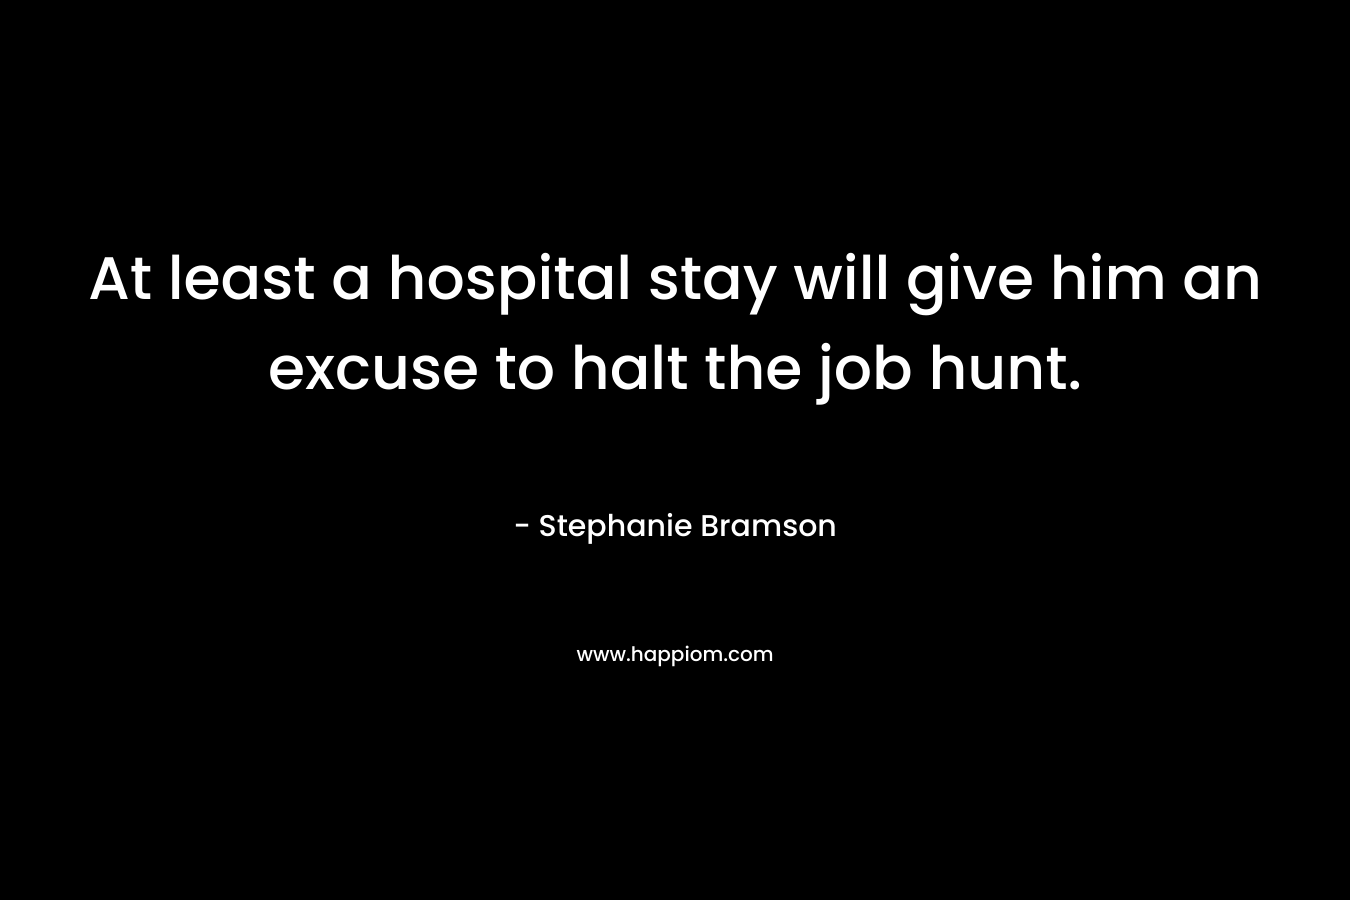 At least a hospital stay will give him an excuse to halt the job hunt.